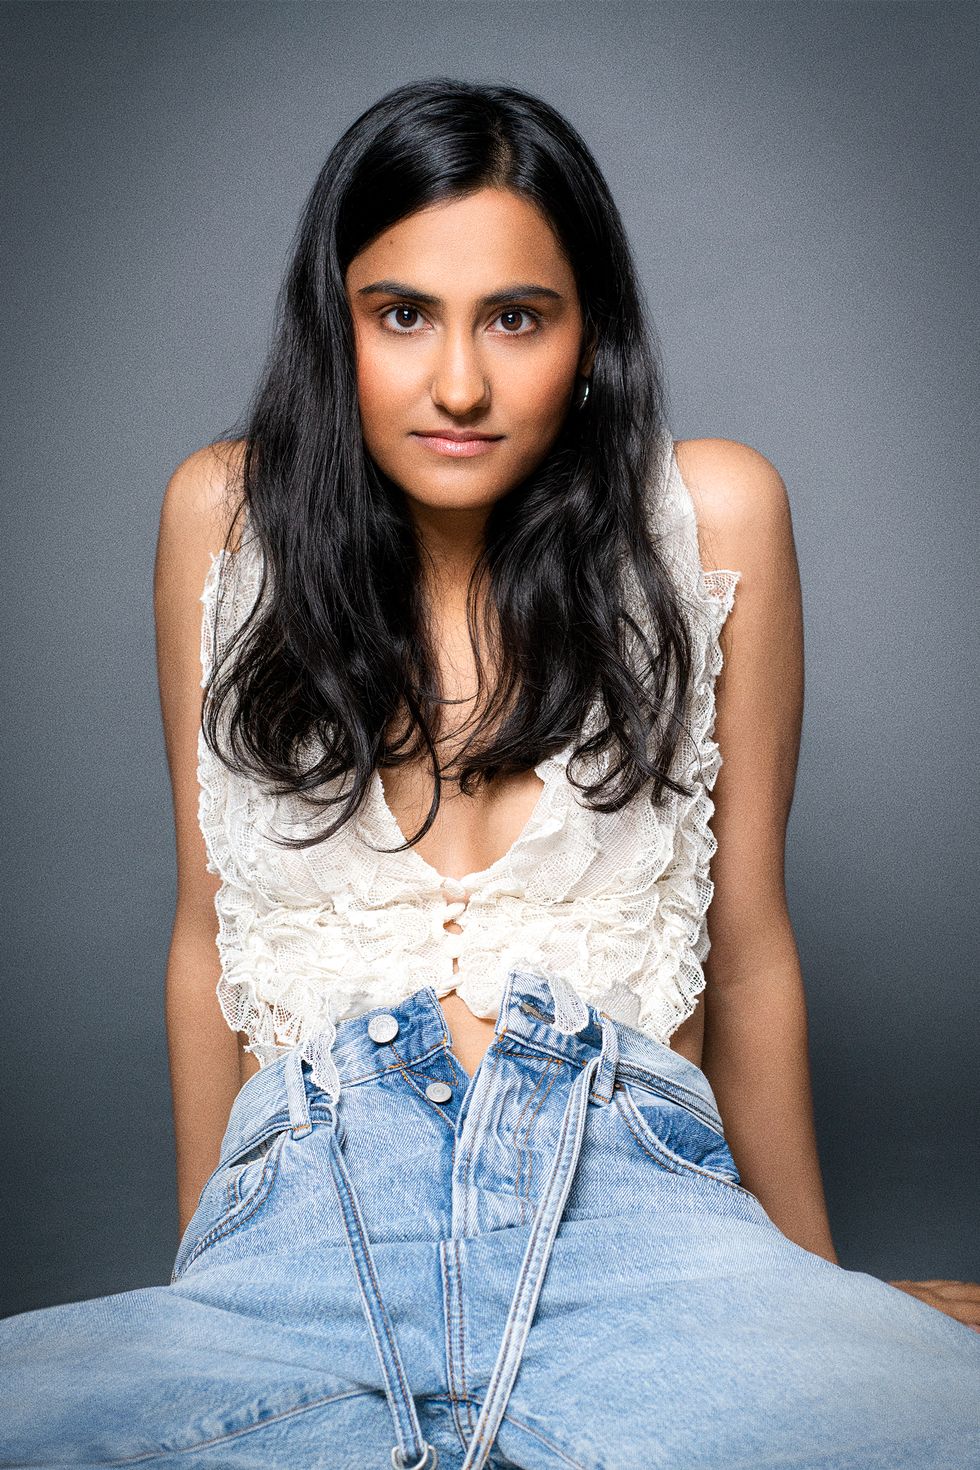 The Sex Lives of College Girls' Star Amrit Kaur Talks Defying Stereotypes